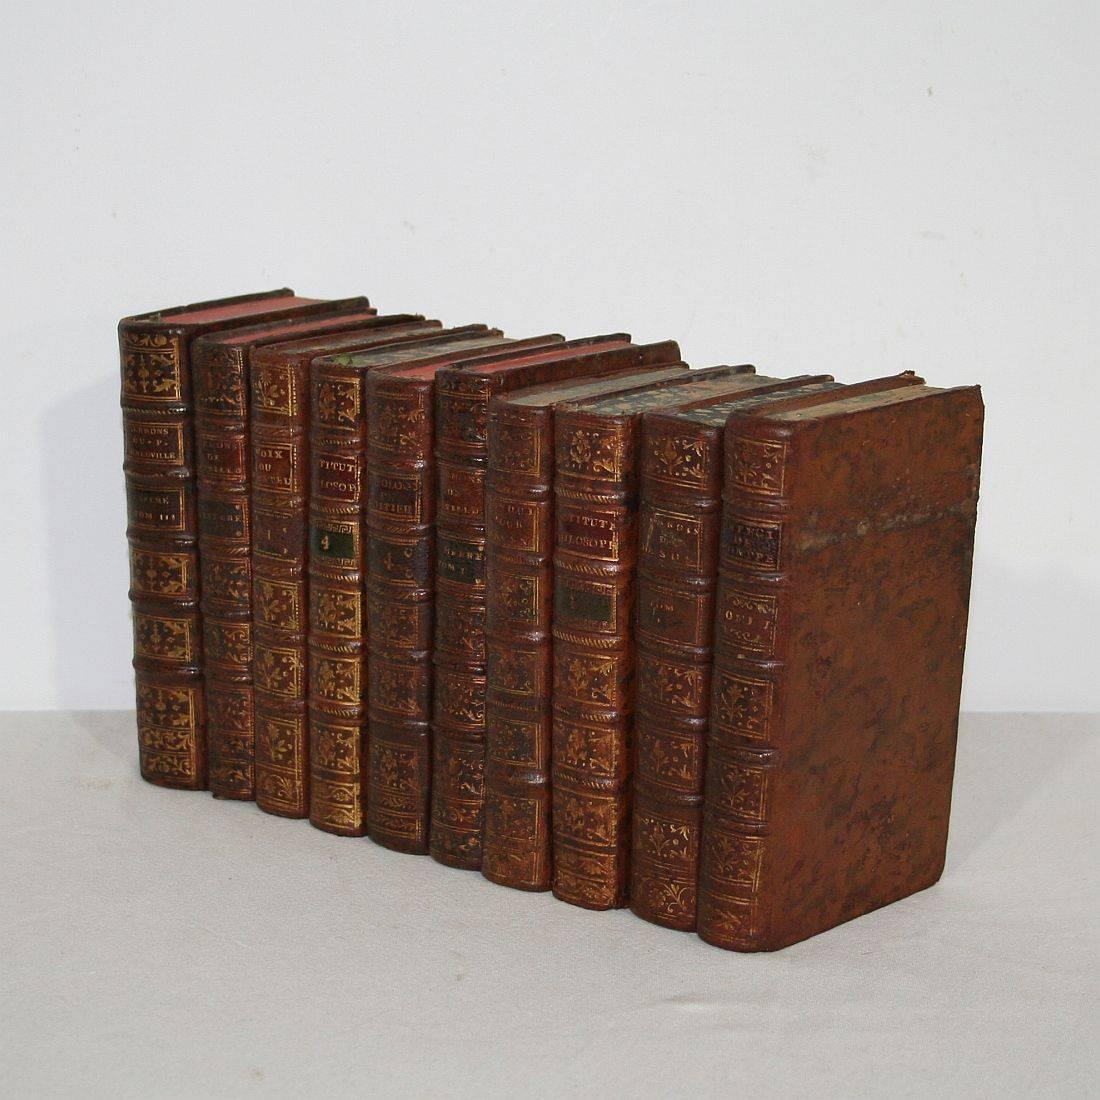 Great collection of 10 leather books
France 18th century
Weathered
Size here below as a group.